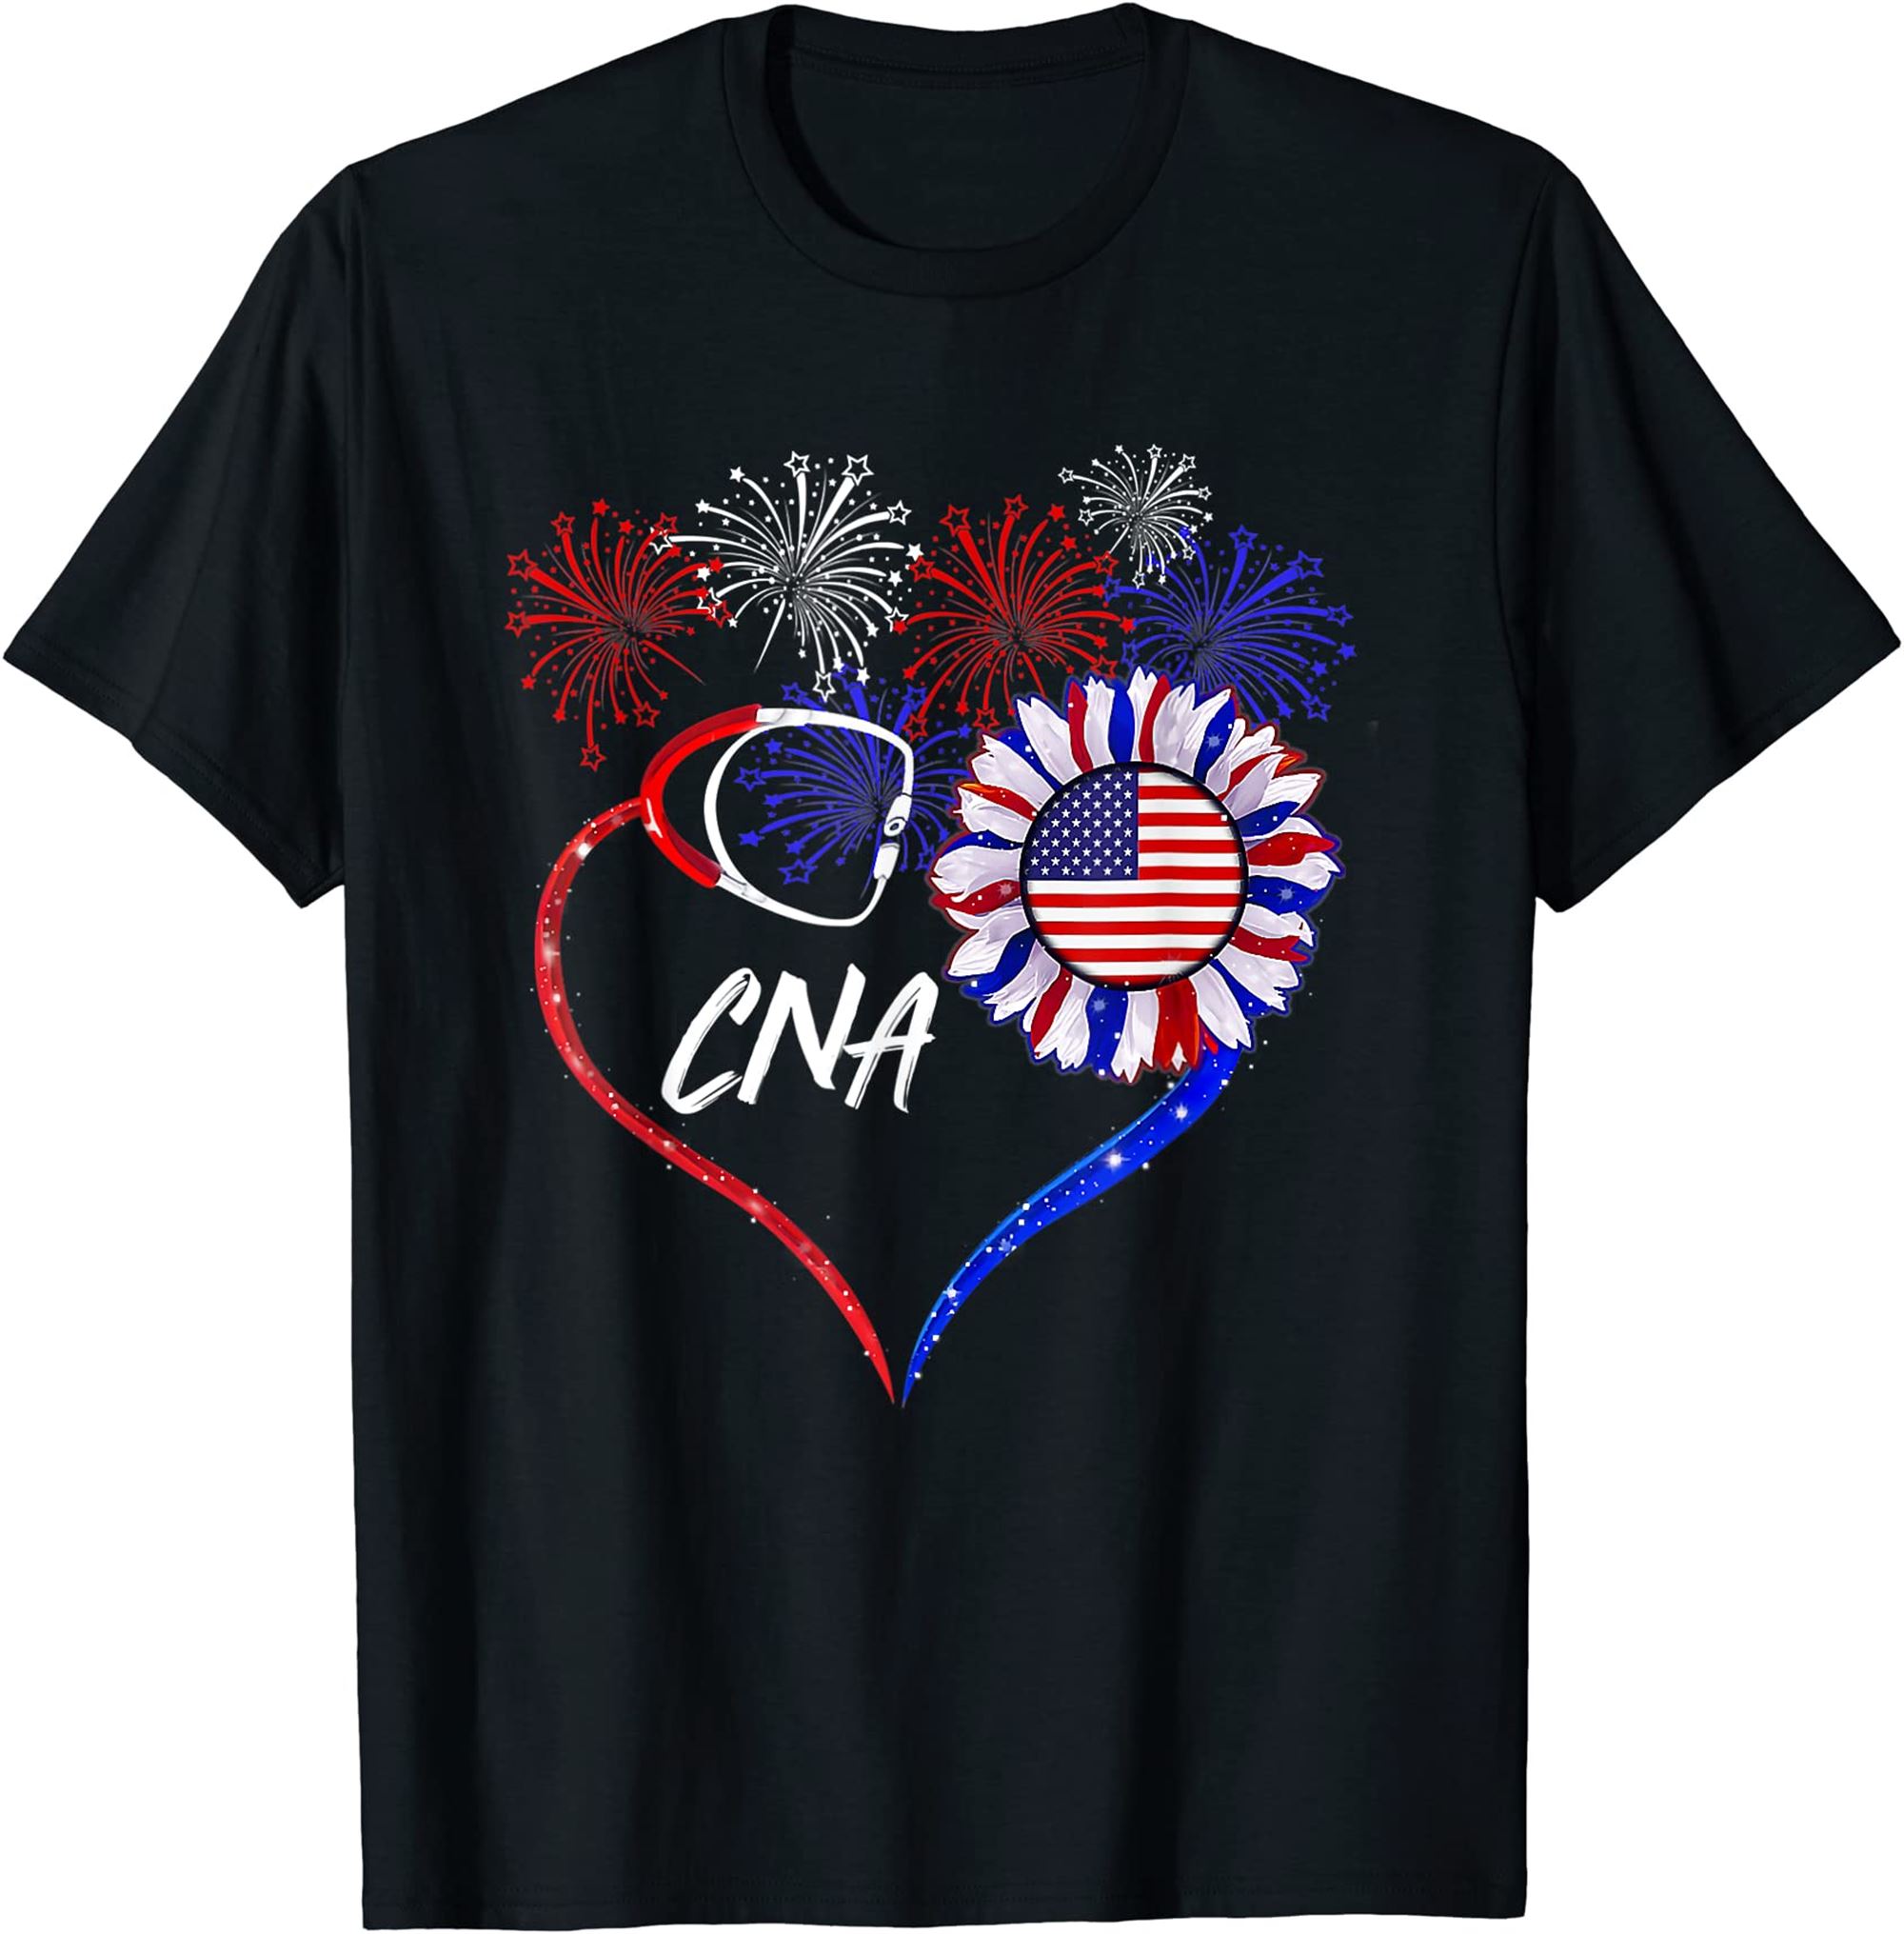 Patriotic Nurse Cna 4th Of July American Flag Sunflower Love T-shirt Size Up To 5xl